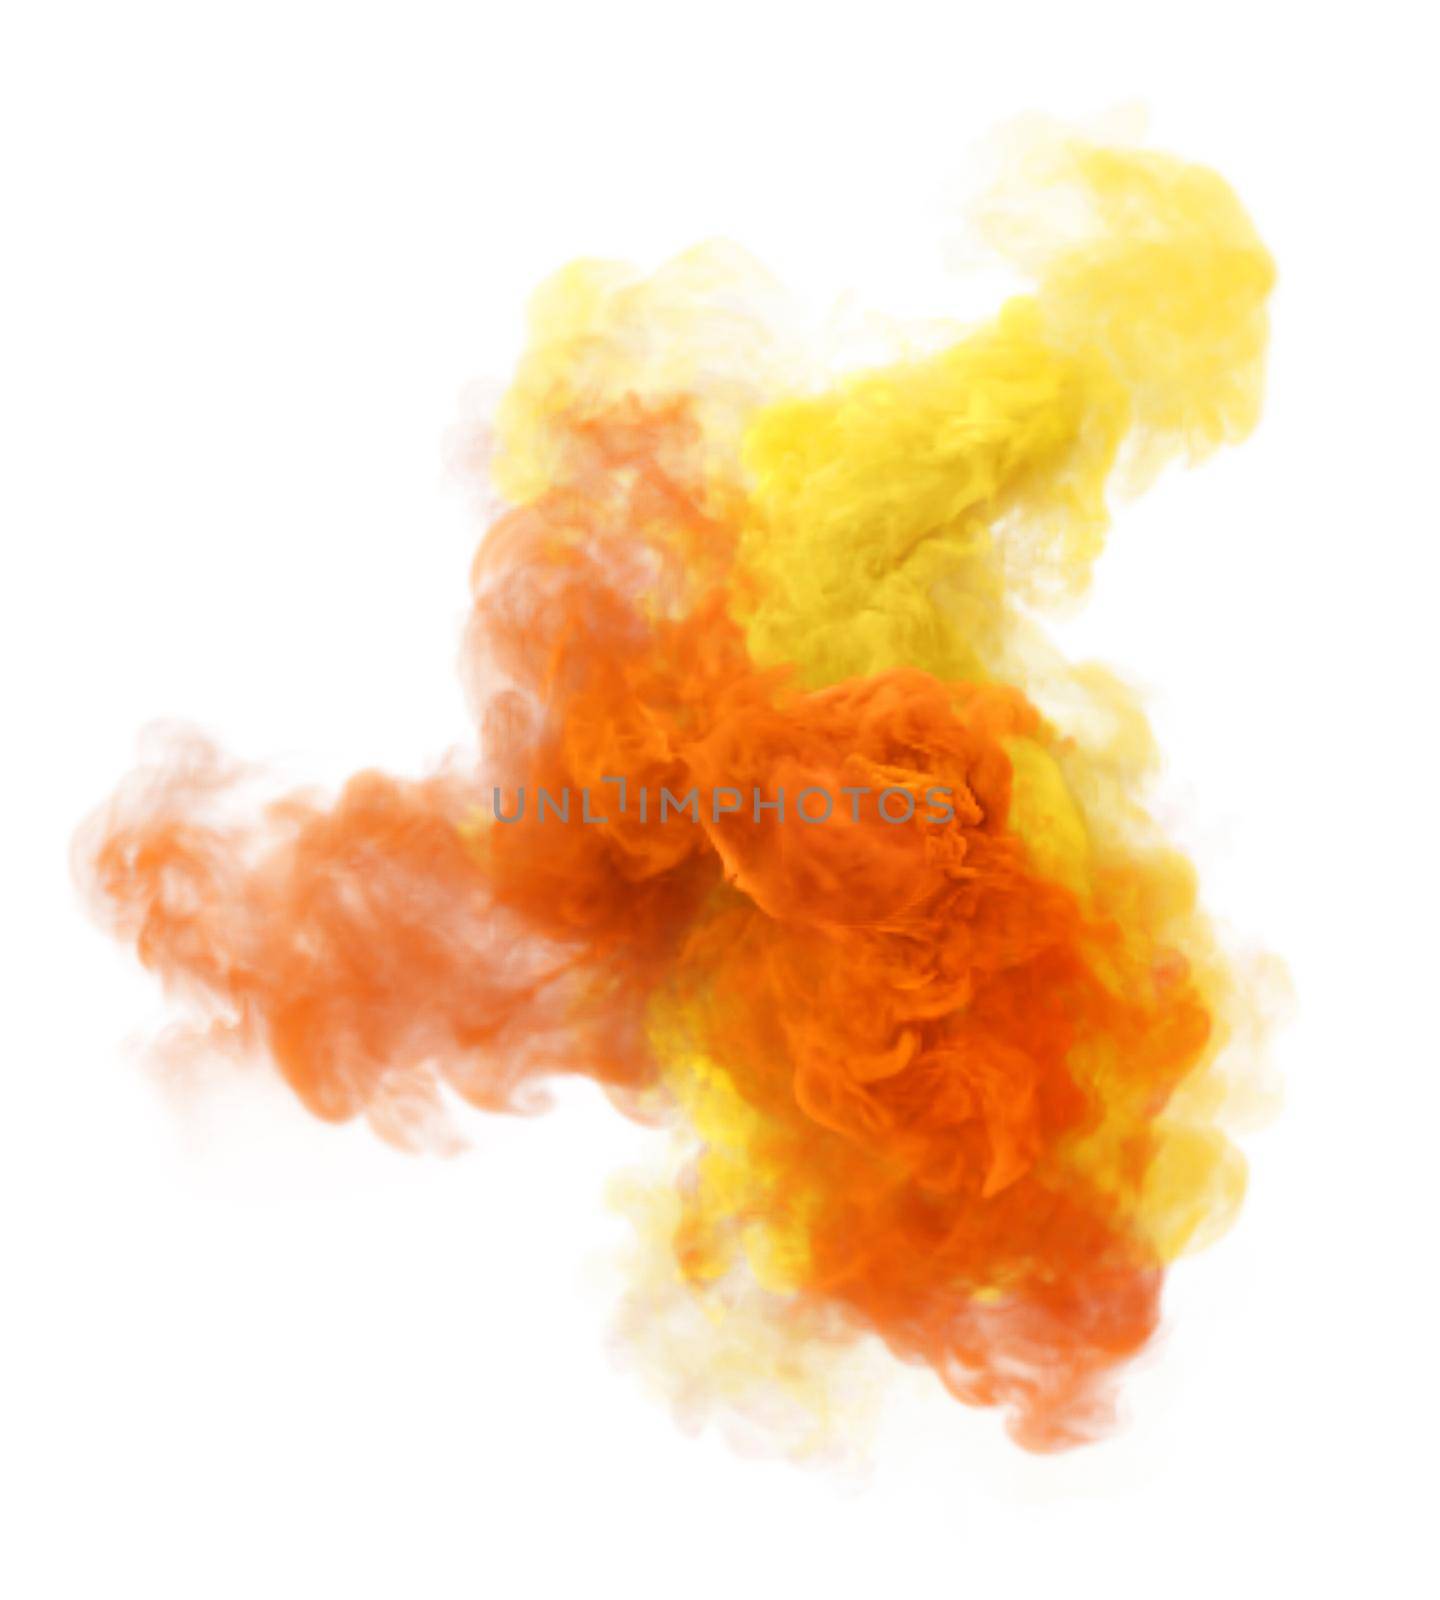 Orange and yellow puff of smoke. Mistery and dangerous fog texture. Duo colors 3D render abstract background for fan festivals and party